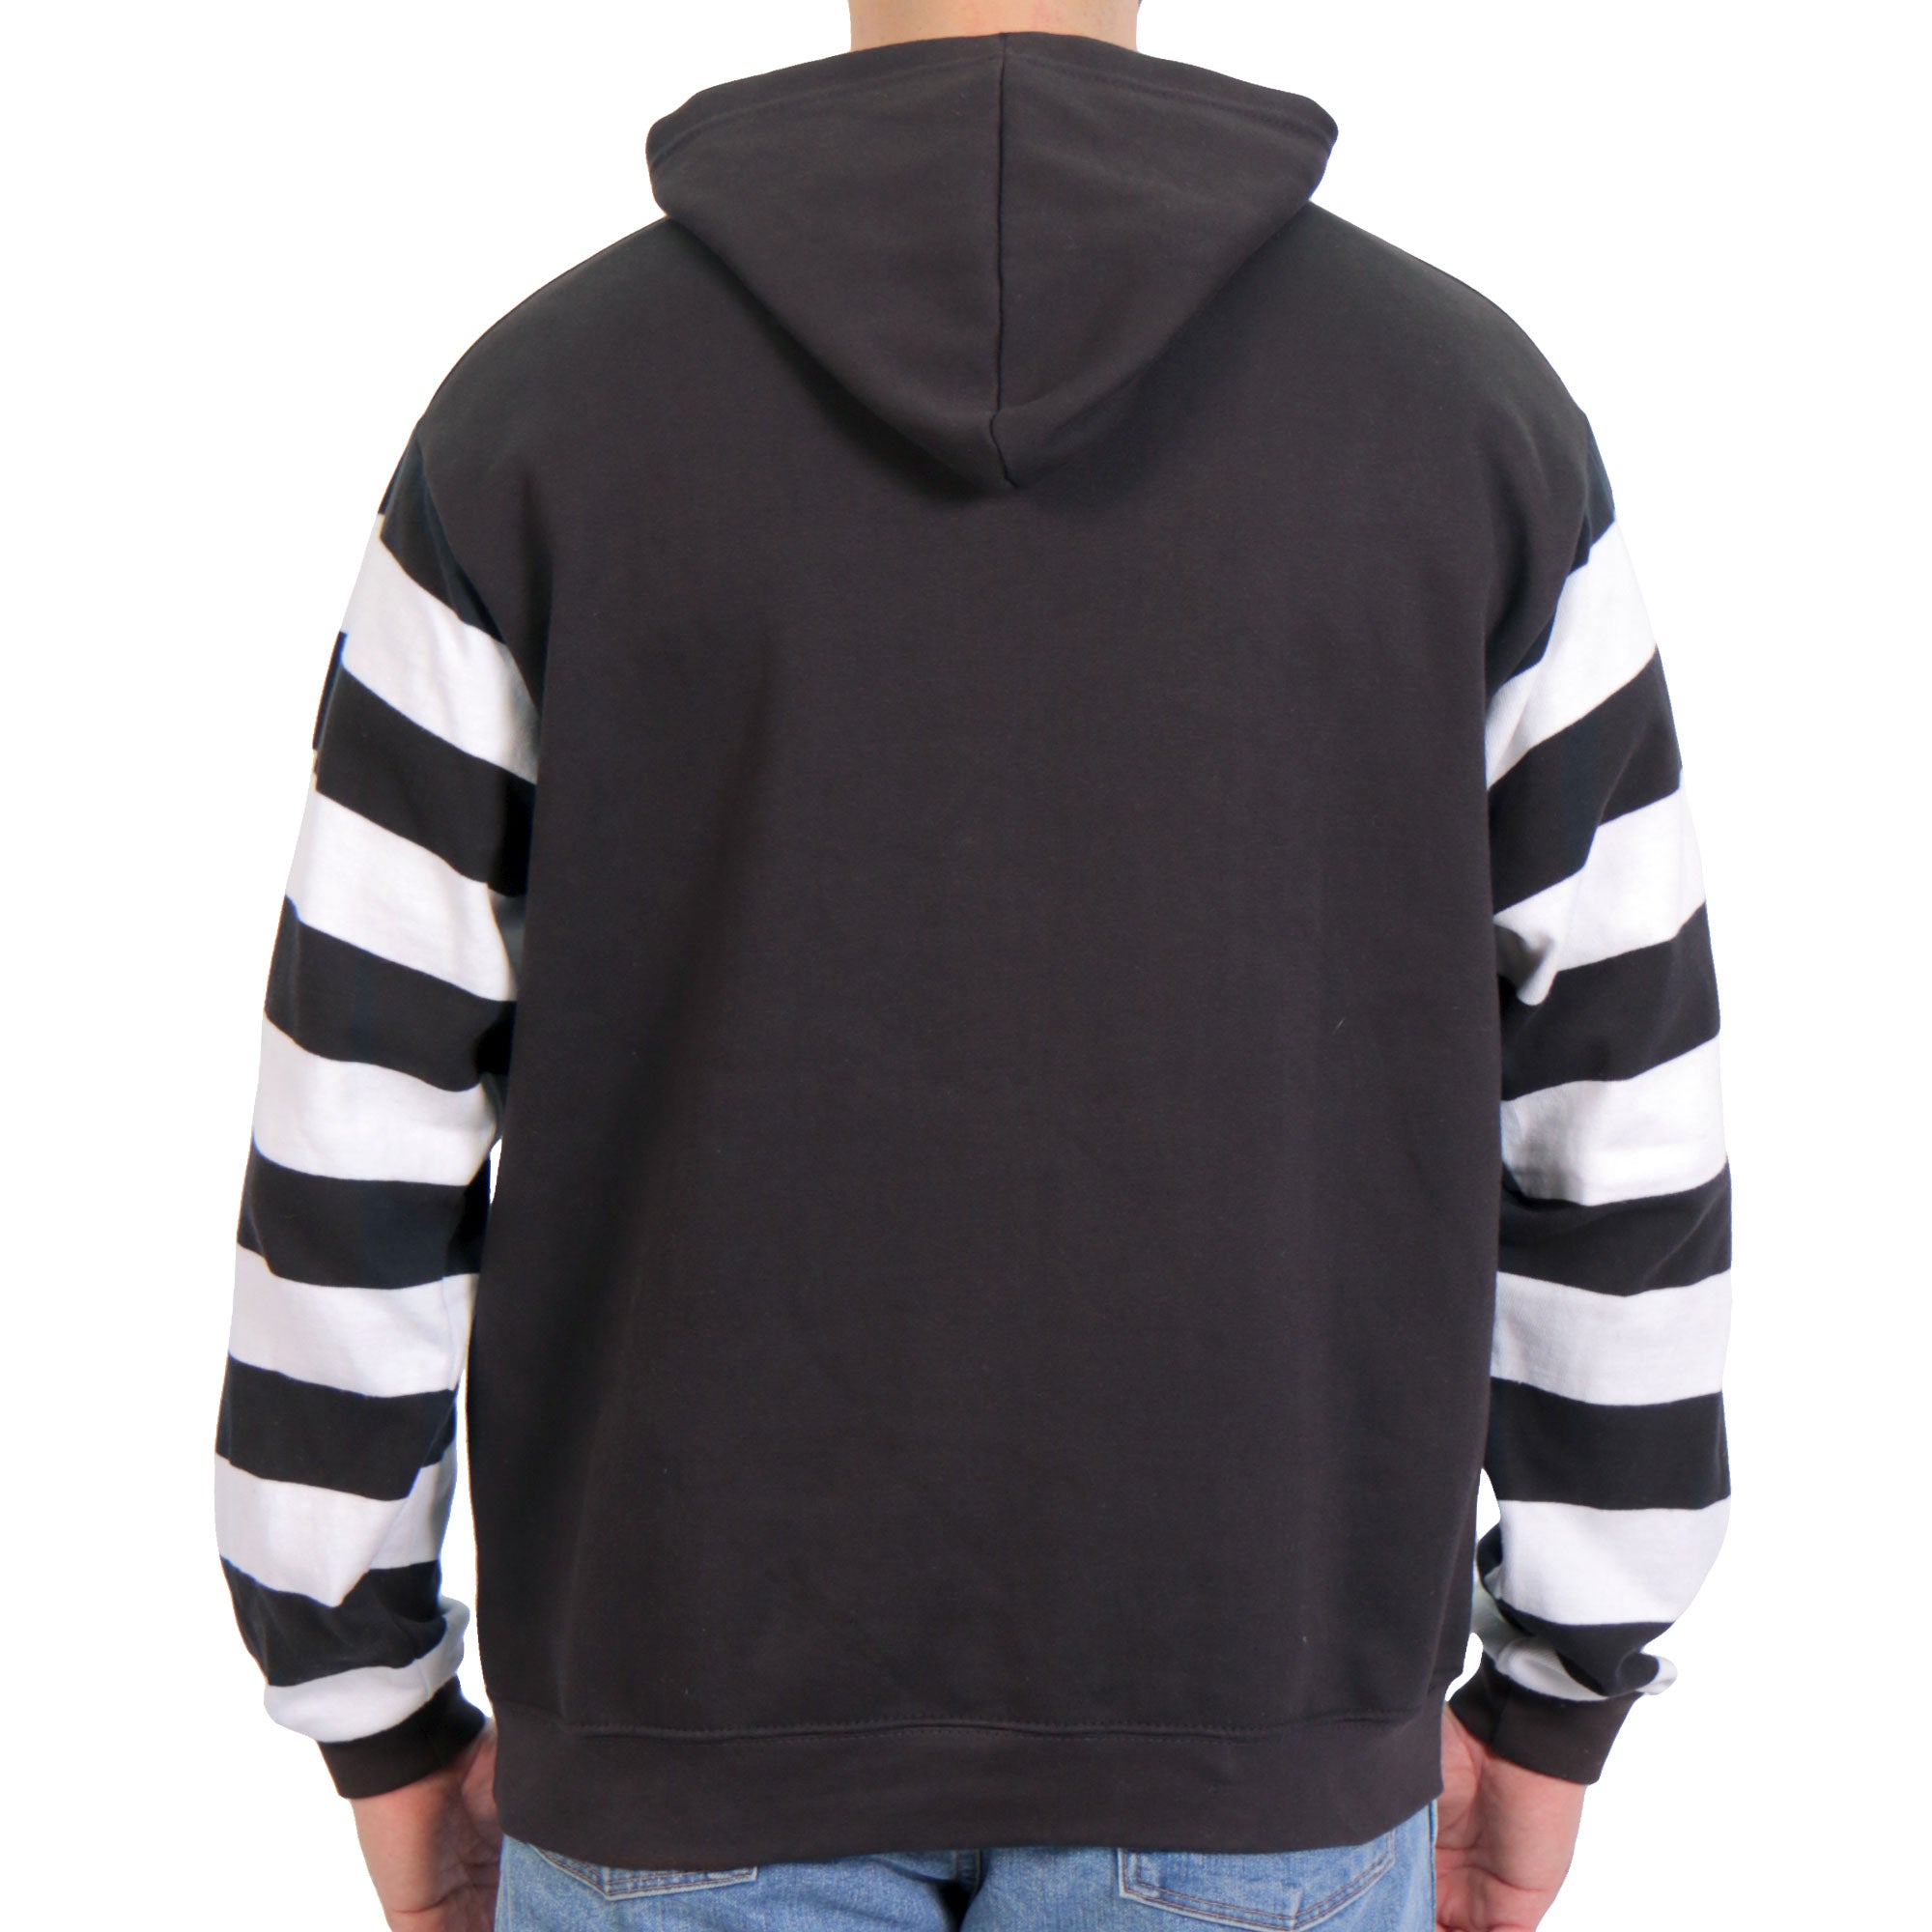 Hot Leathers GSM6003 Men's Black and White Hooded Pullover Sweatshirt with Knit Strip Sleeves